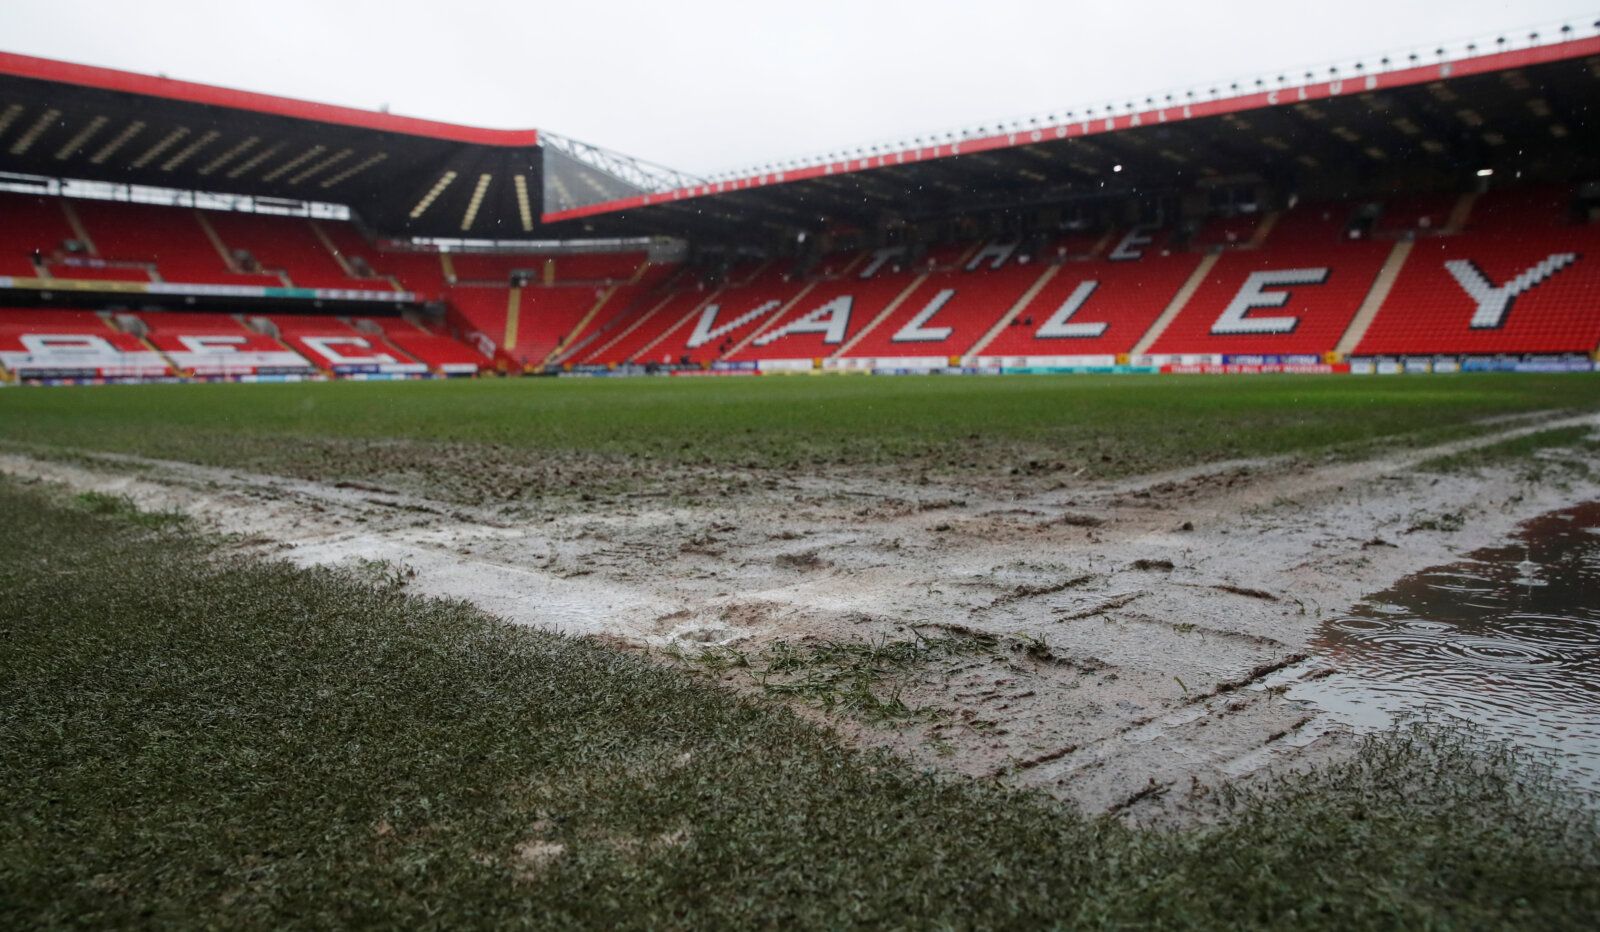 Soccer Football - League One - Charlton Athletic v Portsmouth - The Valley, London, Britain - January 30, 2021  General view of the pitch at The Valley as the game is called off because of a waterlogged pitch  Action Images/Andrew Couldridge  EDITORIAL USE ONLY. No use with unauthorized audio, video, data, fixture lists, club/league logos or "live" services. Online in-match use limited to 75 images, no video emulation. No use in betting, games or single club/league/player publications.  Please c